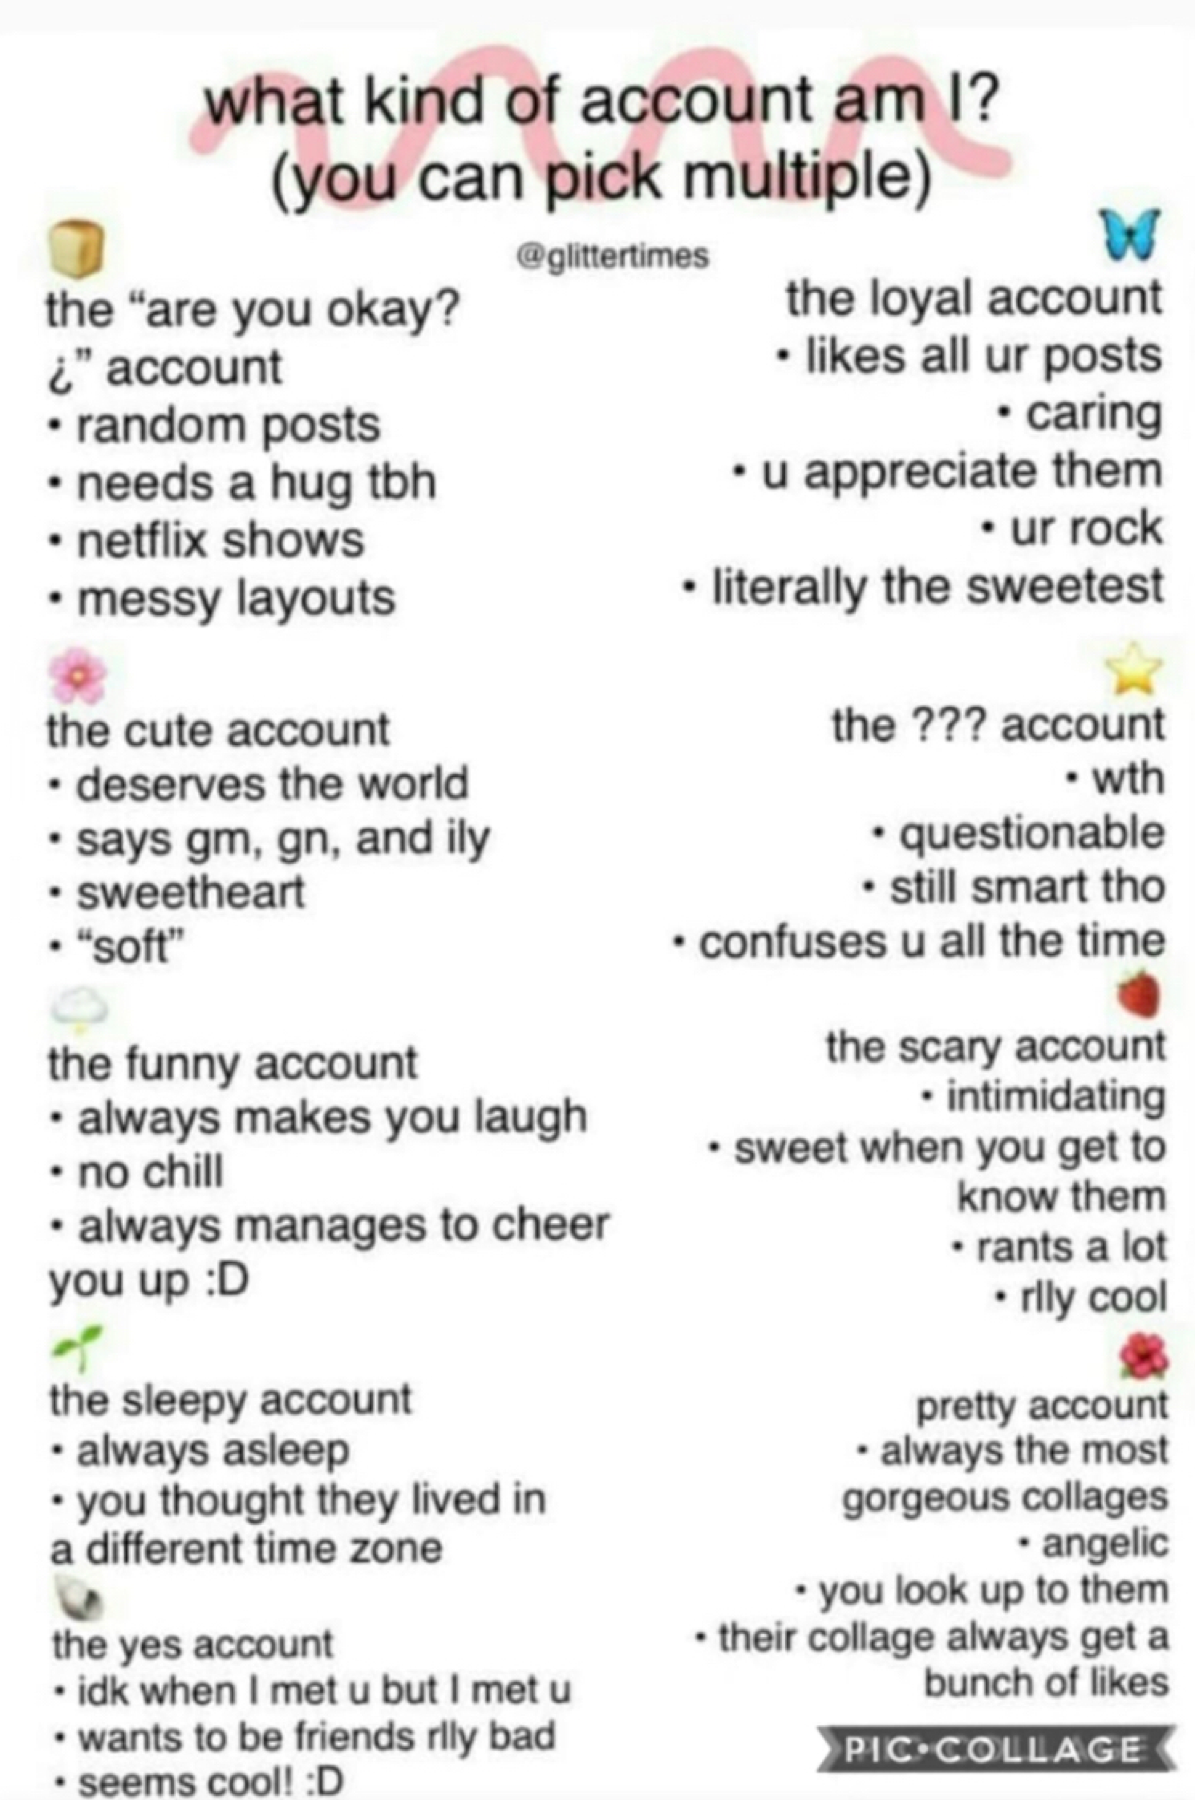 credit to @glittertimes // it’s so funny how my account has so gradually declined 😬